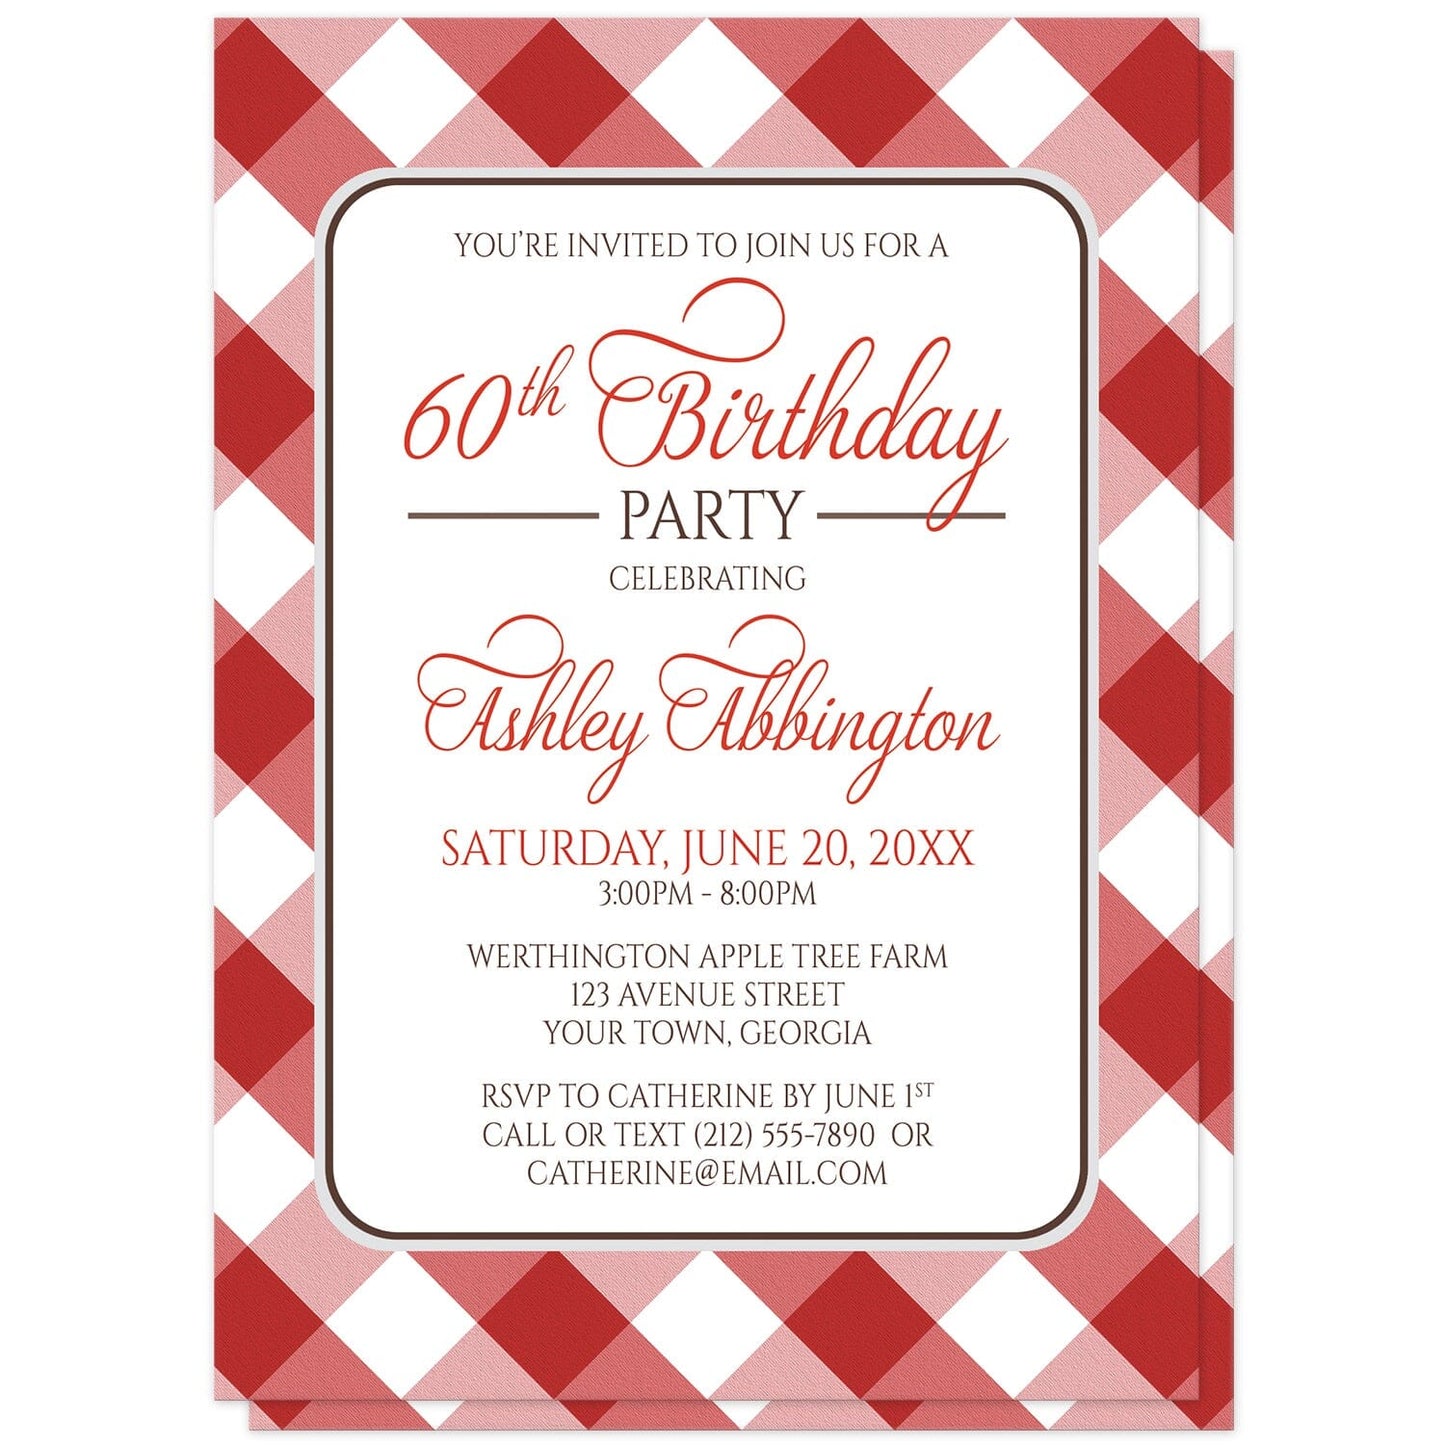 Red Gingham Birthday Party Invitations at Artistically Invited. Red gingham birthday party invitations with your personalized party details custom printed in red and brown inside a white rectangular area outlined in brown and light gray. The background design is a diagonal red and white gingham pattern which is printed on the front and the back of the invitations. 